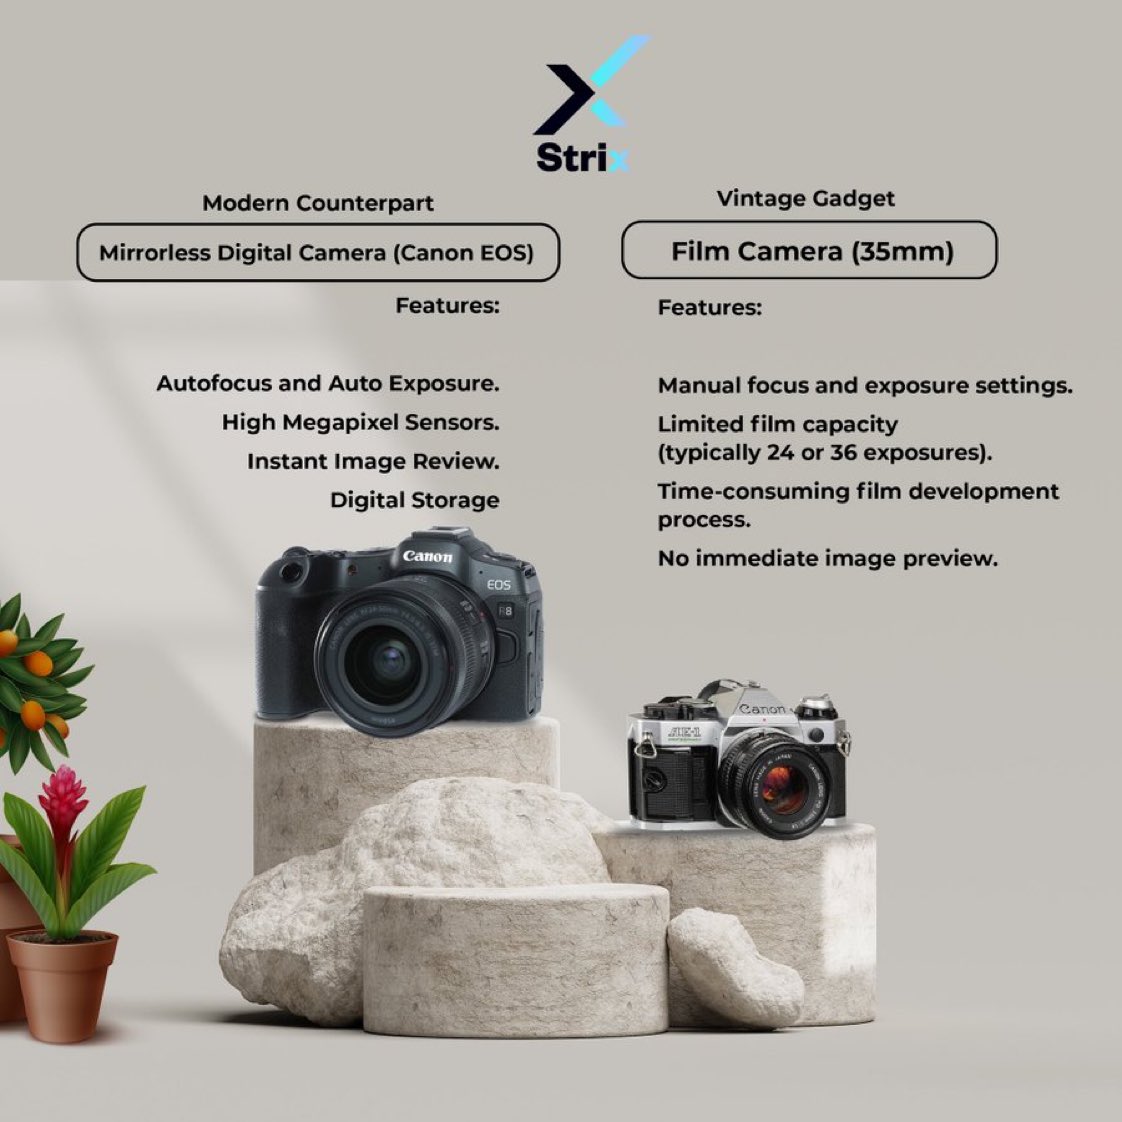 If someone were to dash you a camera, would you prefer a digital camera or a vintage one?

#Thinkstrix